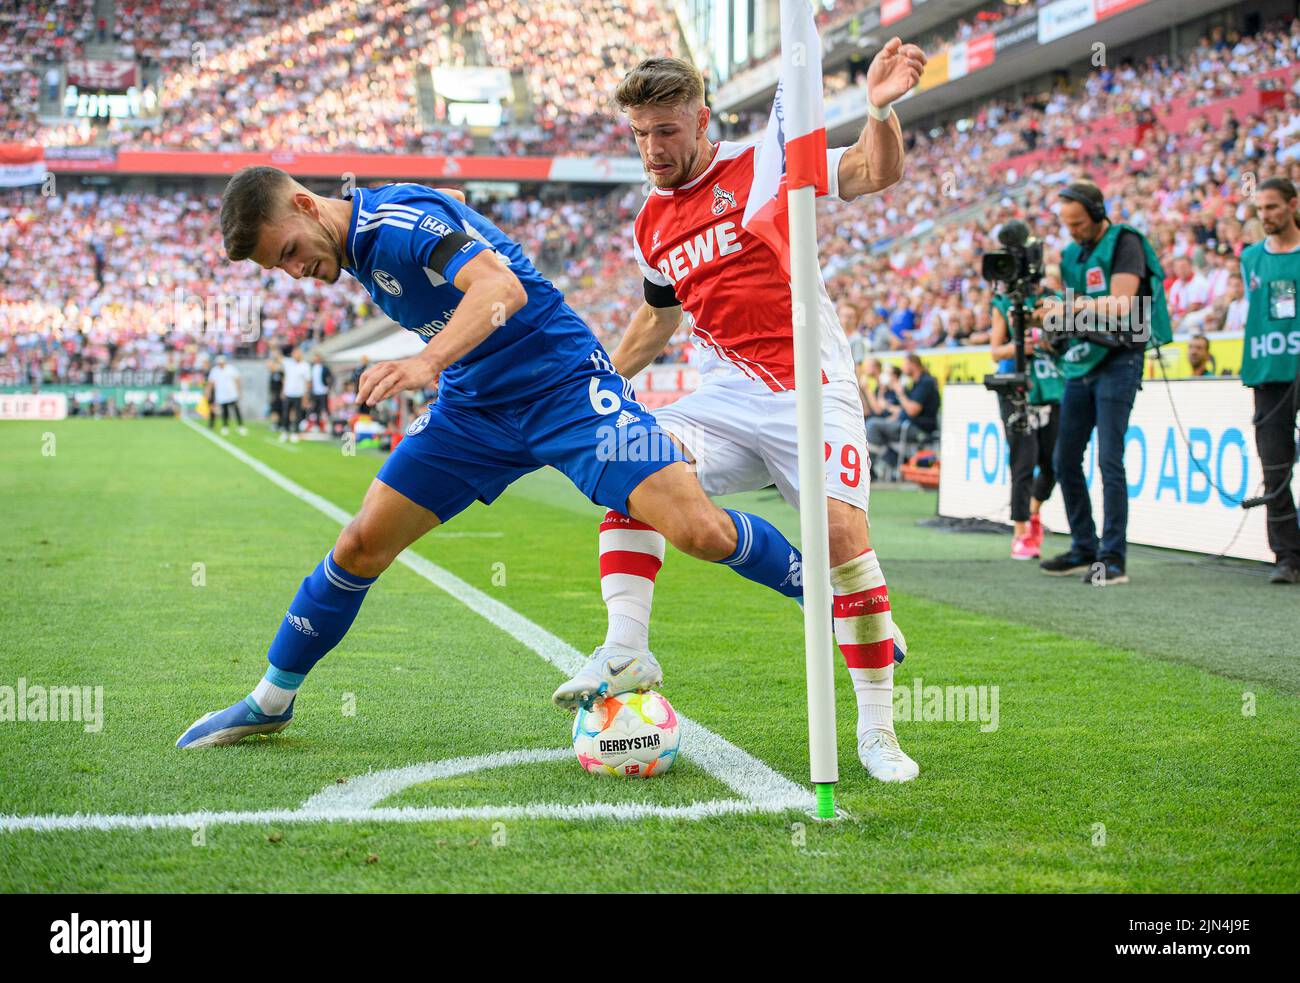 Koeln/ Germany. August 7th, 2022, left to right Tom KRAUSS (GE), Jan THIELMANN (K) duels, action, corner flag, stadium, playing field, outside line, goal line, football 1st Bundesliga, 1st matchday, FC Cologne (K) - FC Schalke 04 (GE) 3 :1, on August 7th, 2022 in Cologne/ Germany. #DFL regulations prohibit any use of photographs as image sequences and/or quasi-video # © Stock Photo